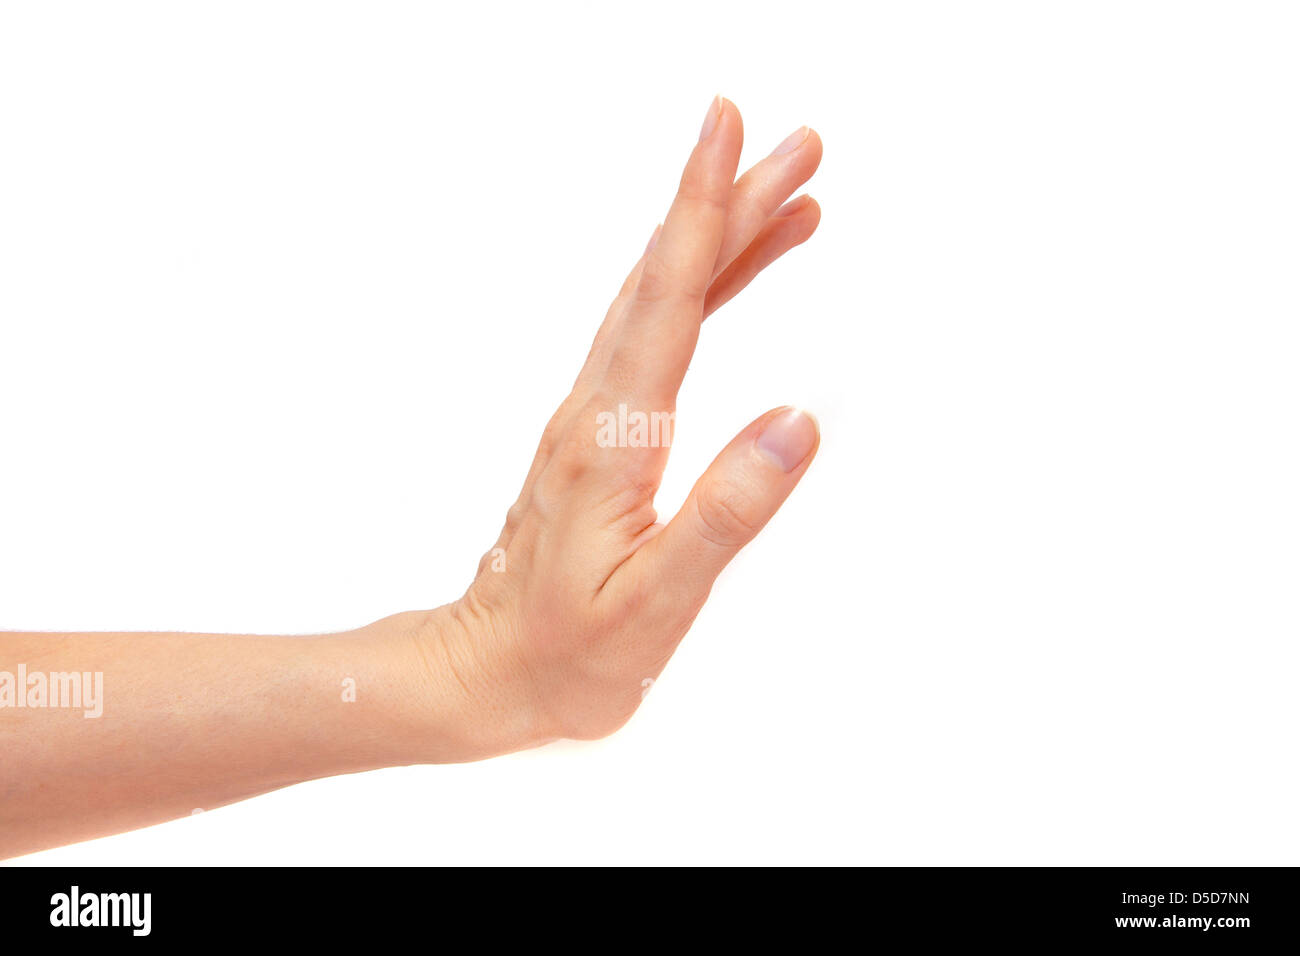 Human Hand Showing Stop Sign Stock Photo - Download Image Now